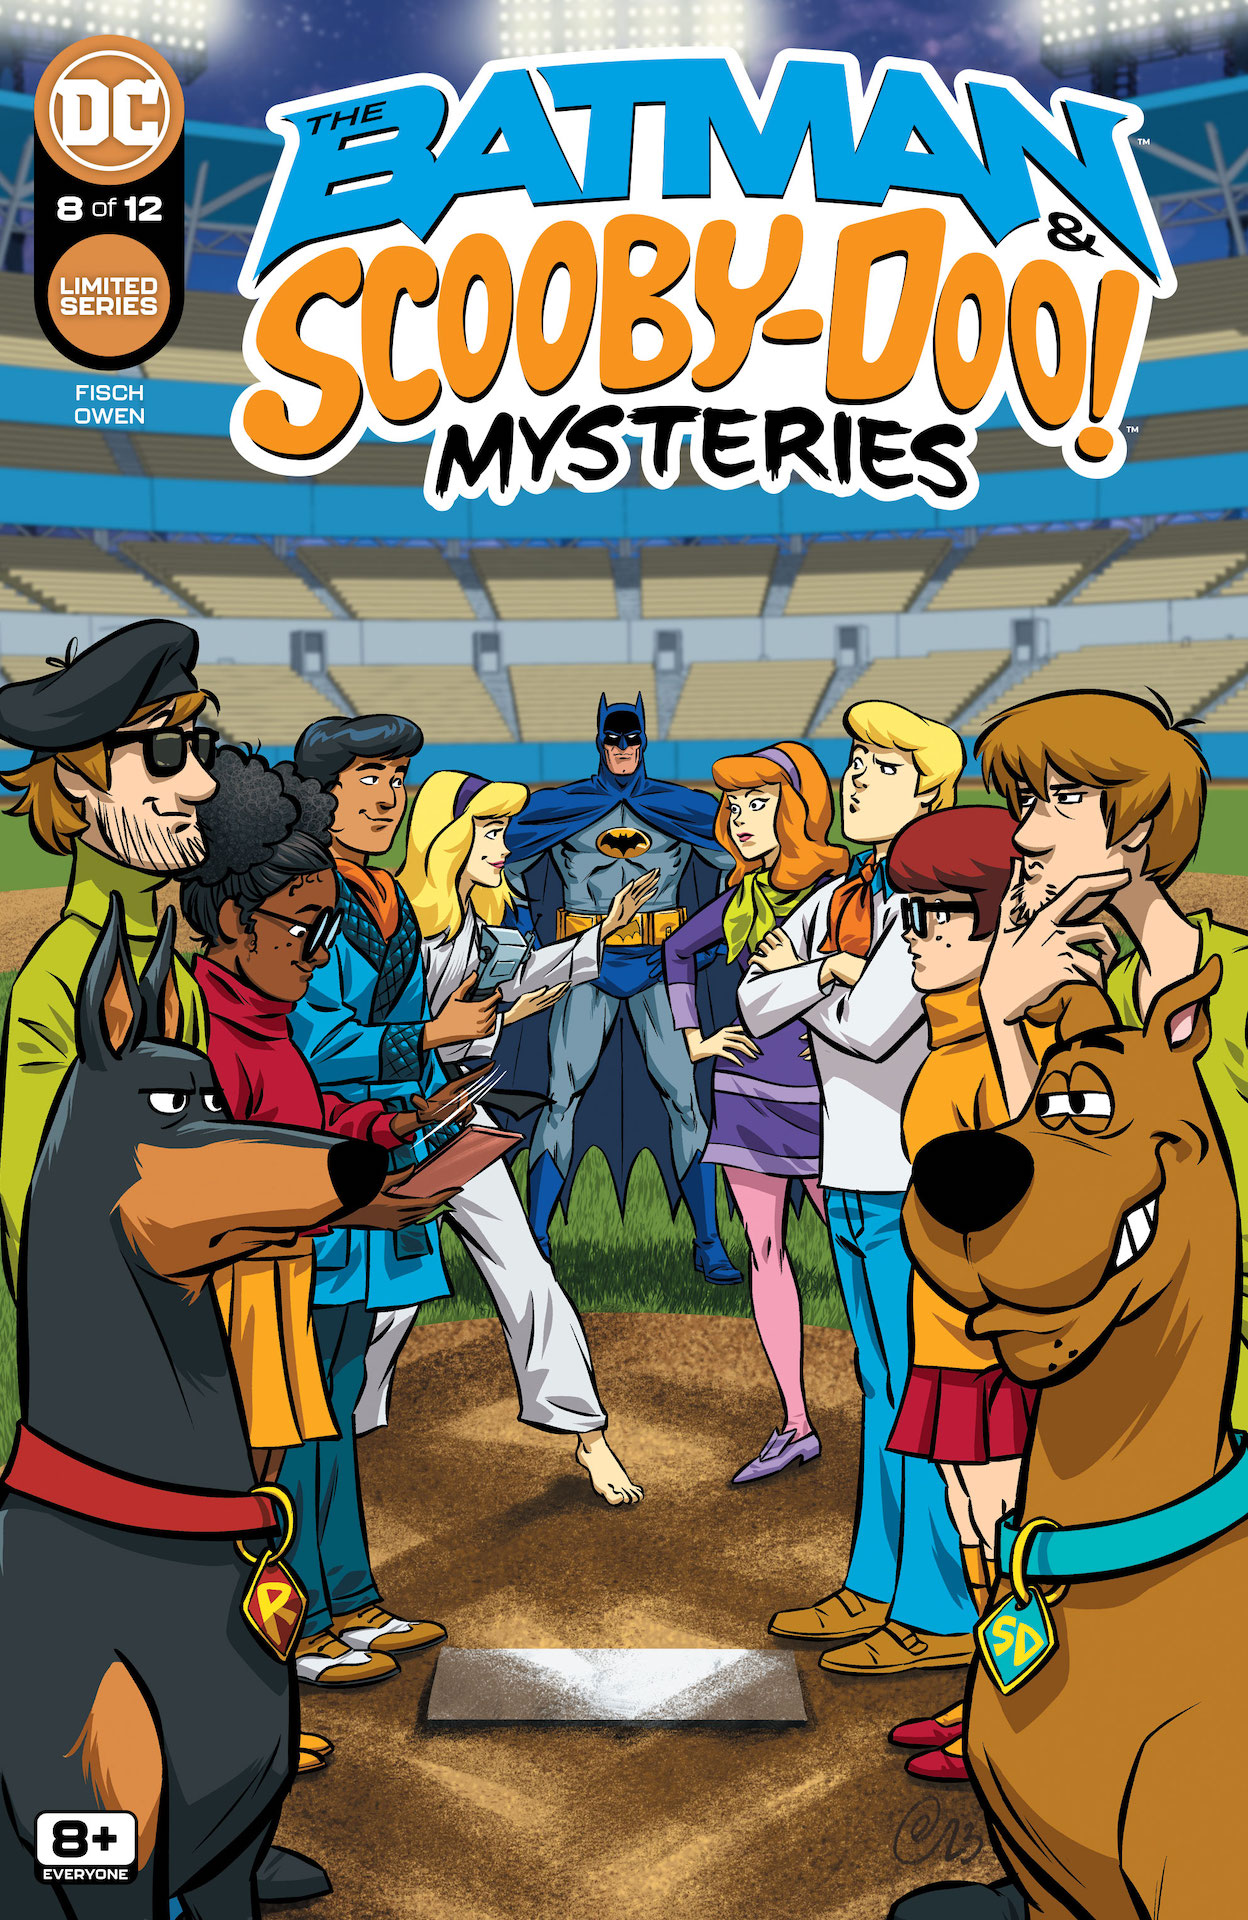 DC Preview: The Batman & Scooby-Doo Mysteries #8